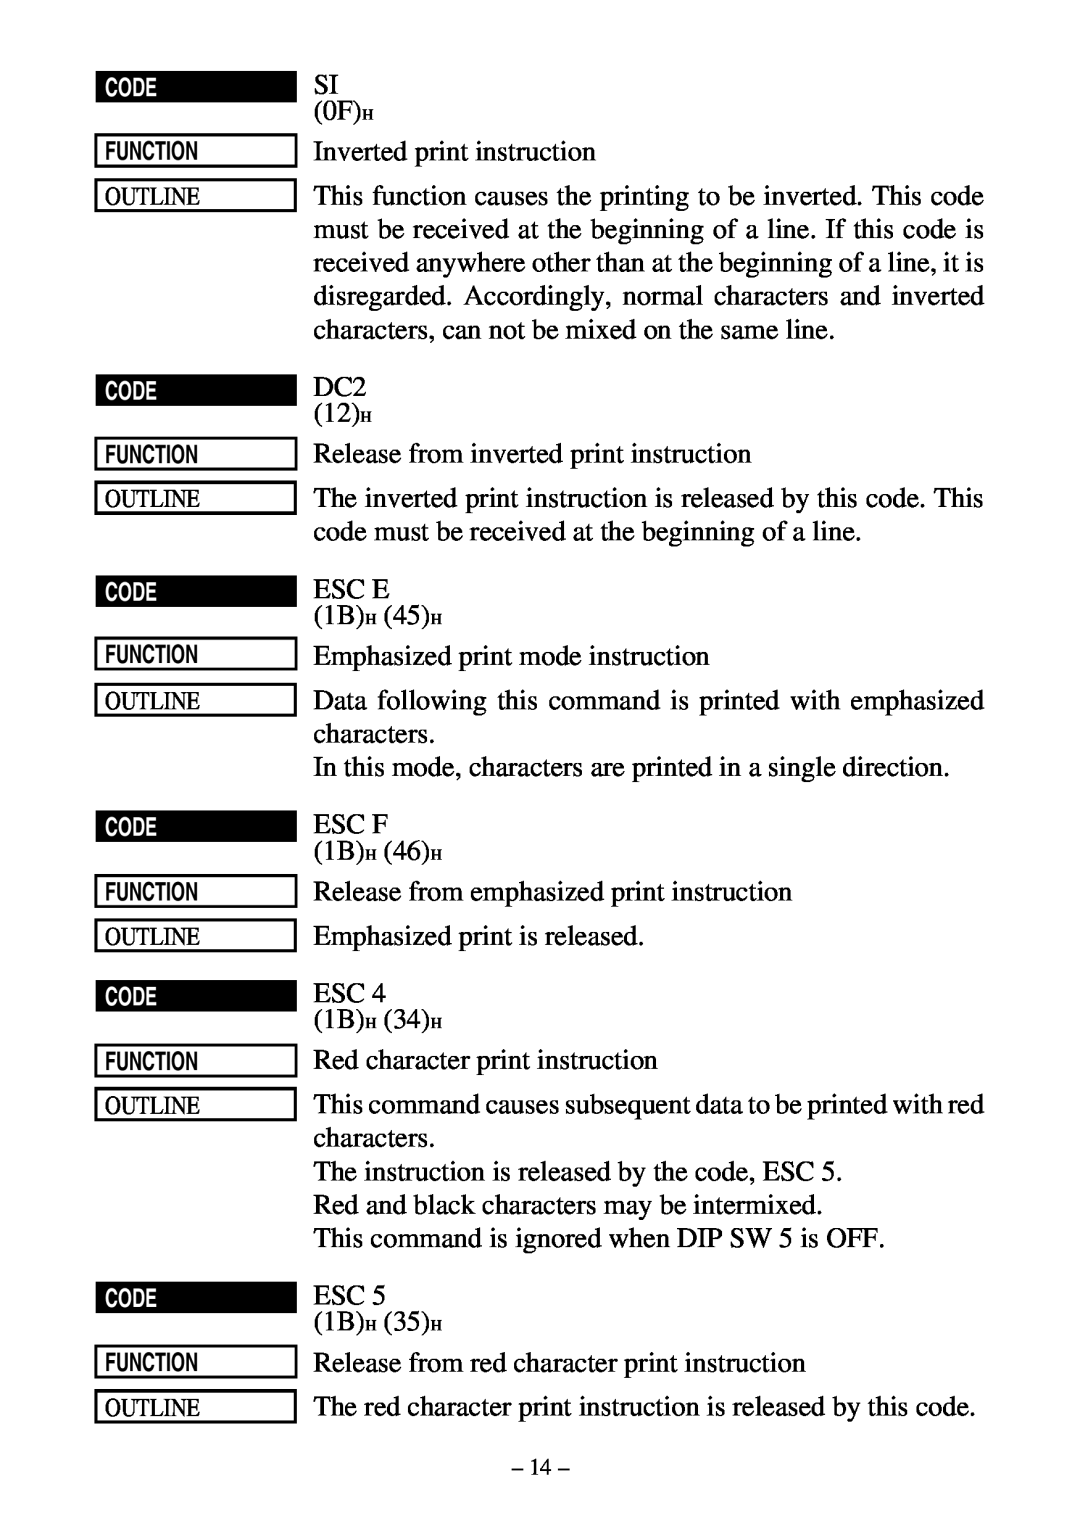 Star Micronics DP8340RC user manual SI 0FH Inverted print instruction 